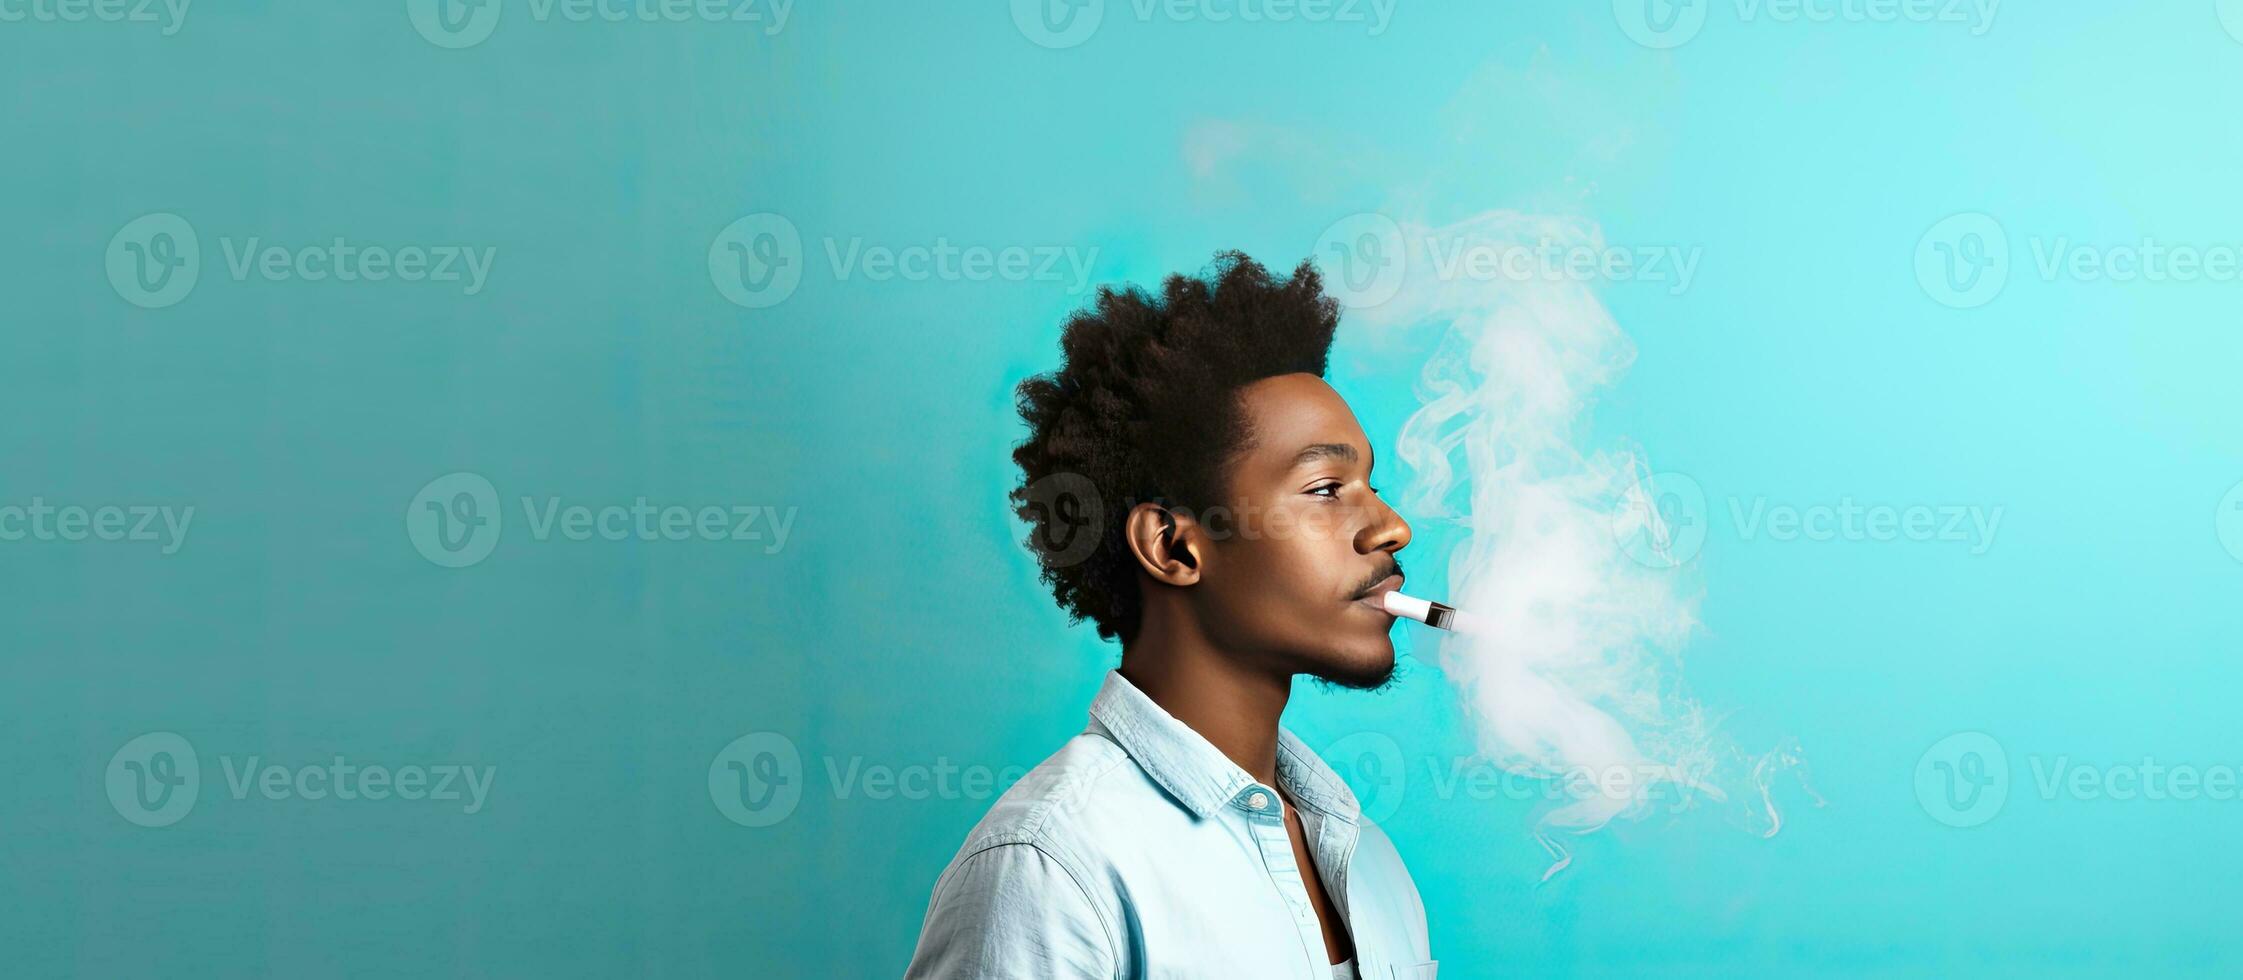 Blue background man using vaping device room for text photo